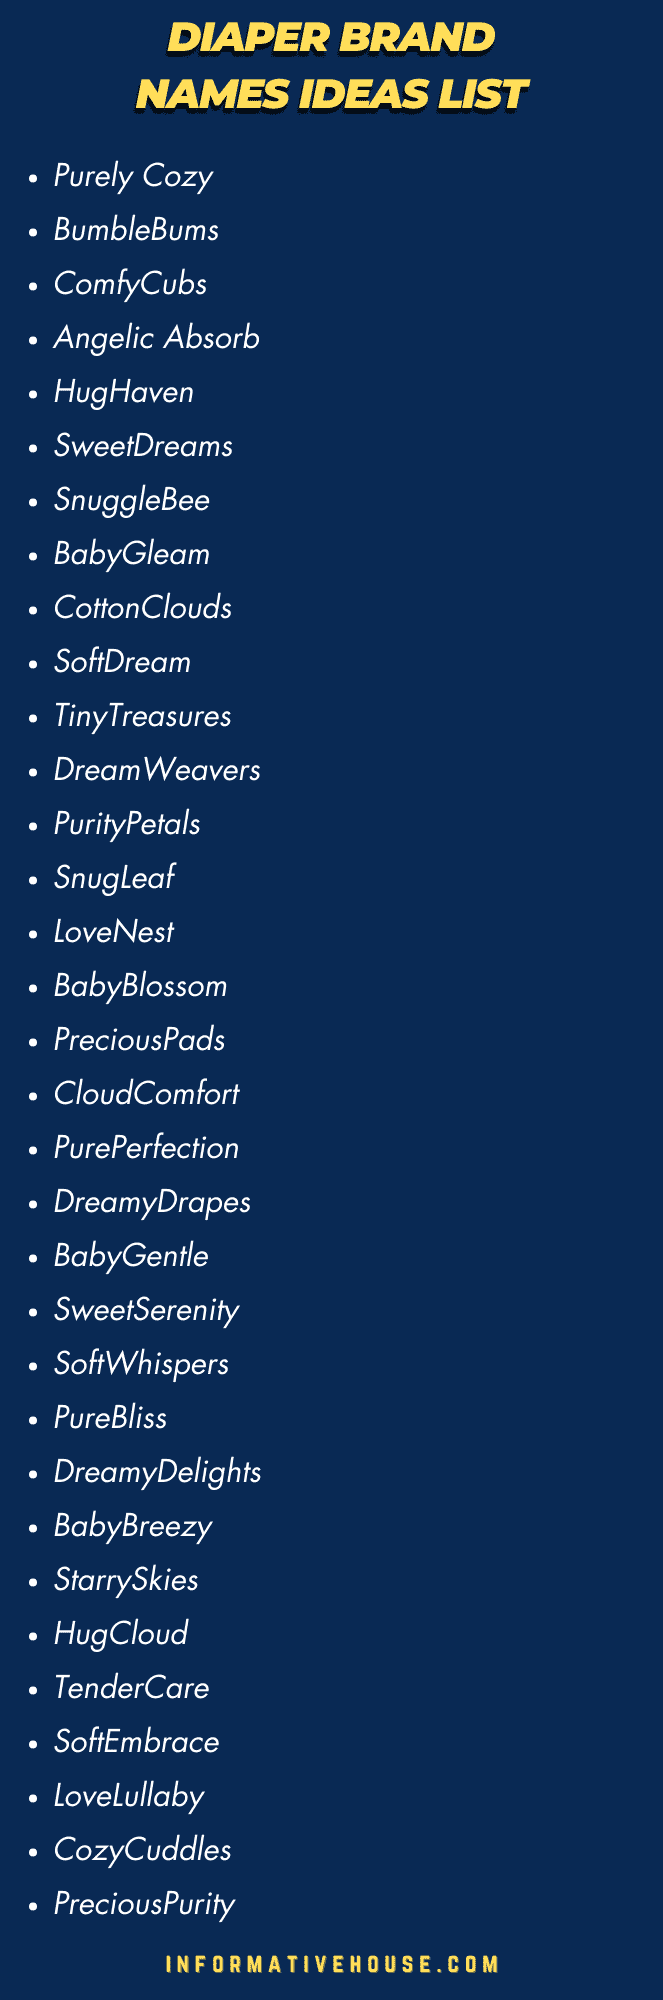 Top 40 Baby Diaper Brand Names Ideas List to start your diaper brand